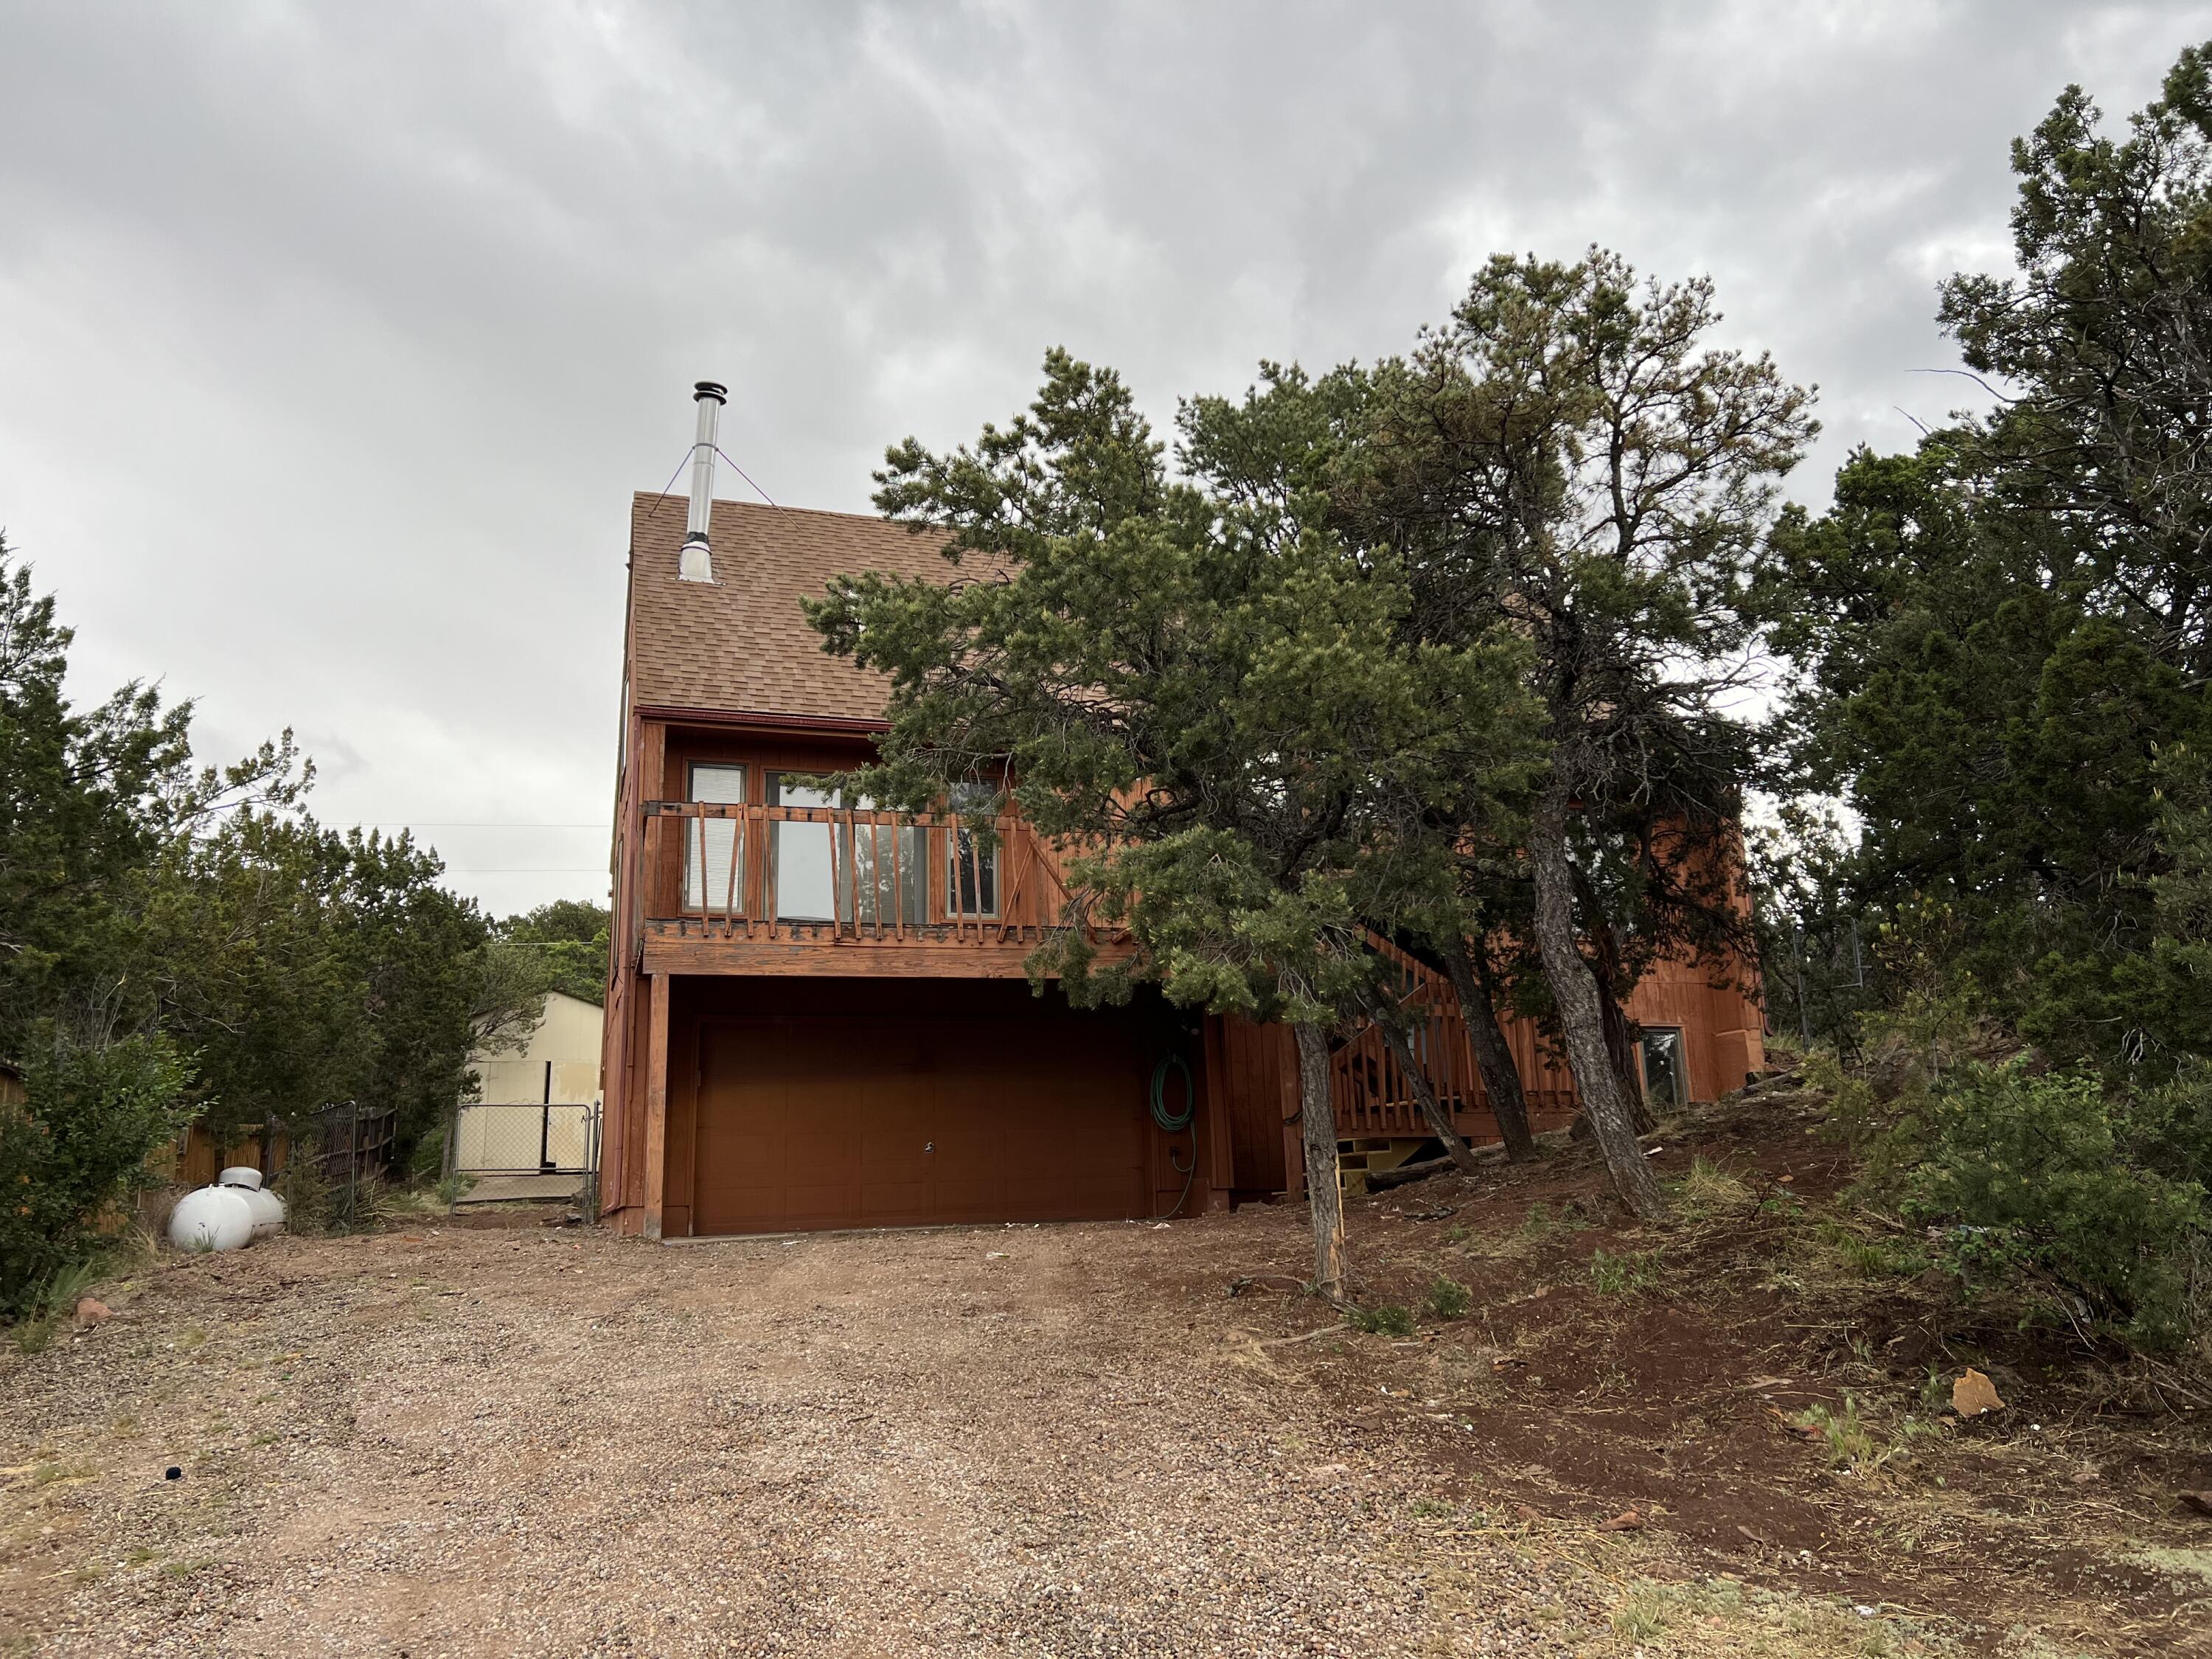 A great opportunity for the saavy investor.  This home has some Amazing Views of the Sandia Mountains.  3 bedrooms, a loft and a 24x12 Bonus Room.  2 Decks and mountain views to take your breath away.  Storage shed on just under a 1/2 acre.